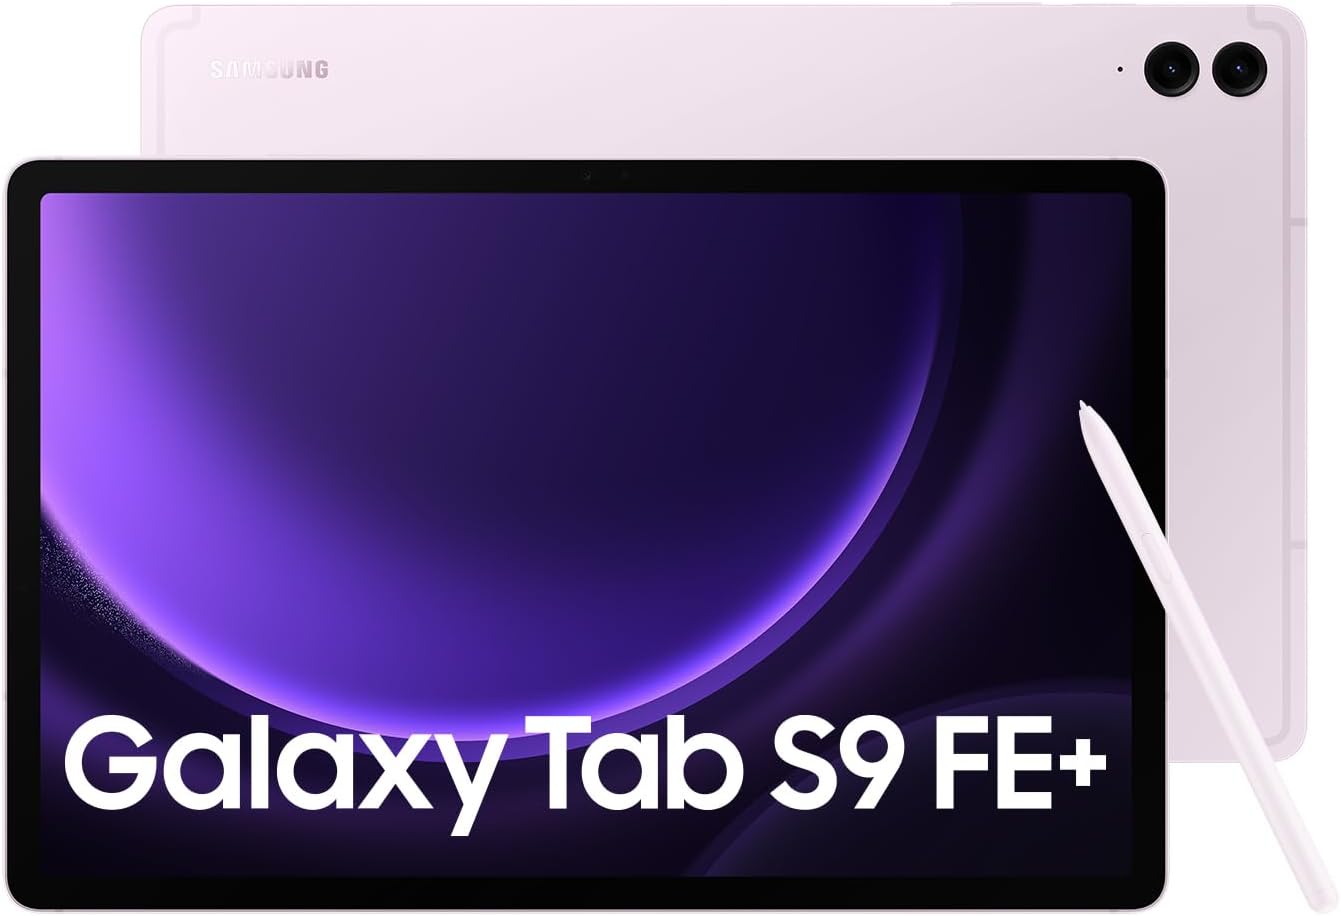 Lavender Samsung Galaxy Tab S9 FE+ 12.4 5G Android Tablet - Colorful design for creative possibilities and entertainment. 8806095170381